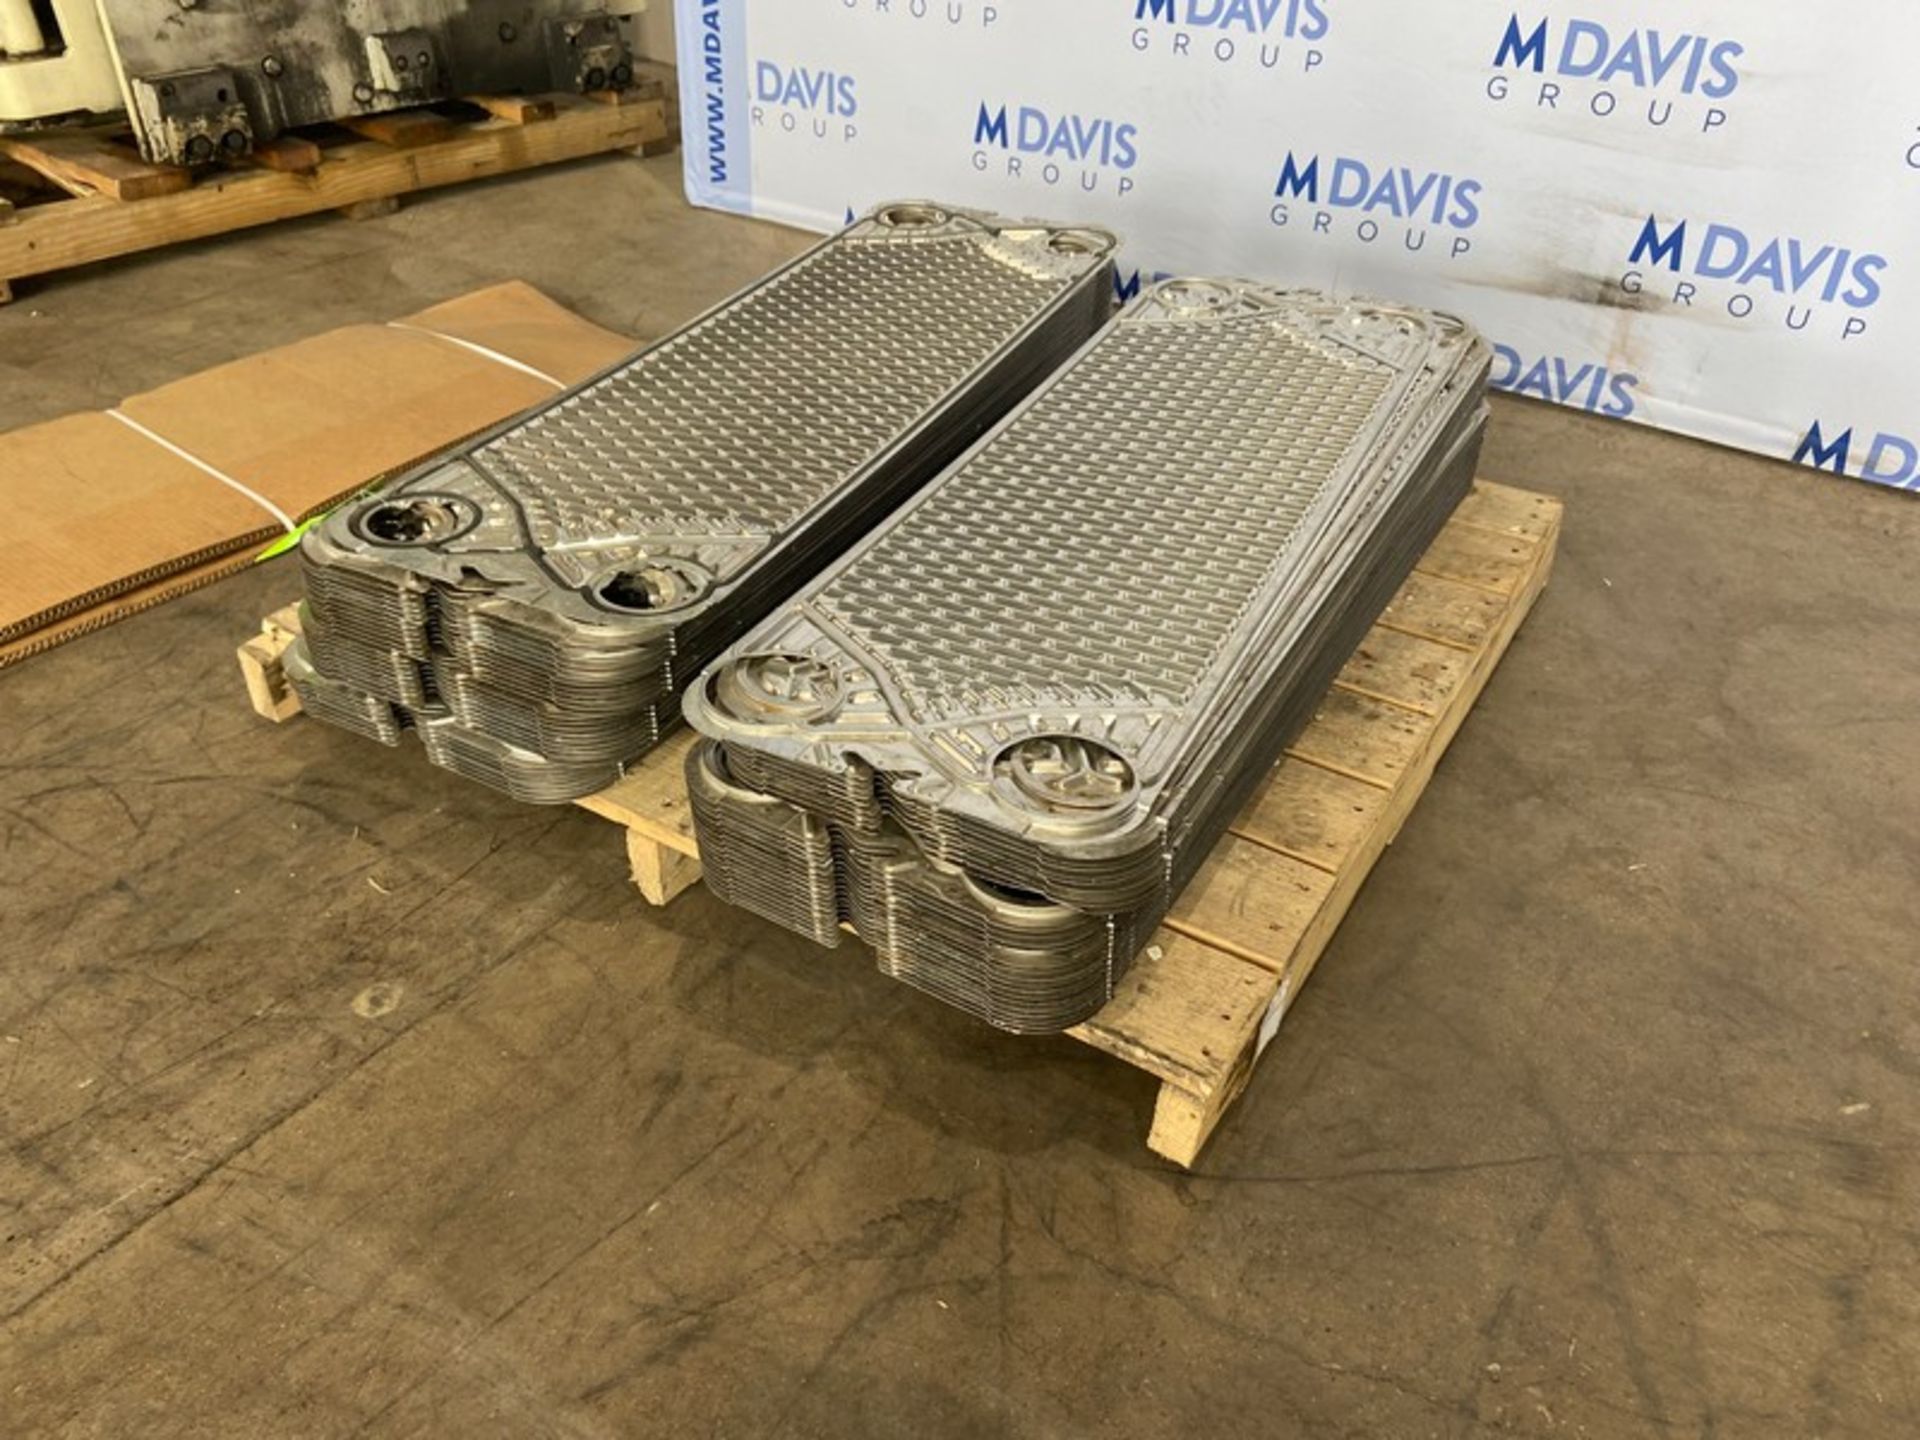 (50) Plate Press Heat Exchanger S/S Plates, , Overall Dims.: Aprox. 47-1/2" L x 15" W, Includes ( - Image 2 of 4